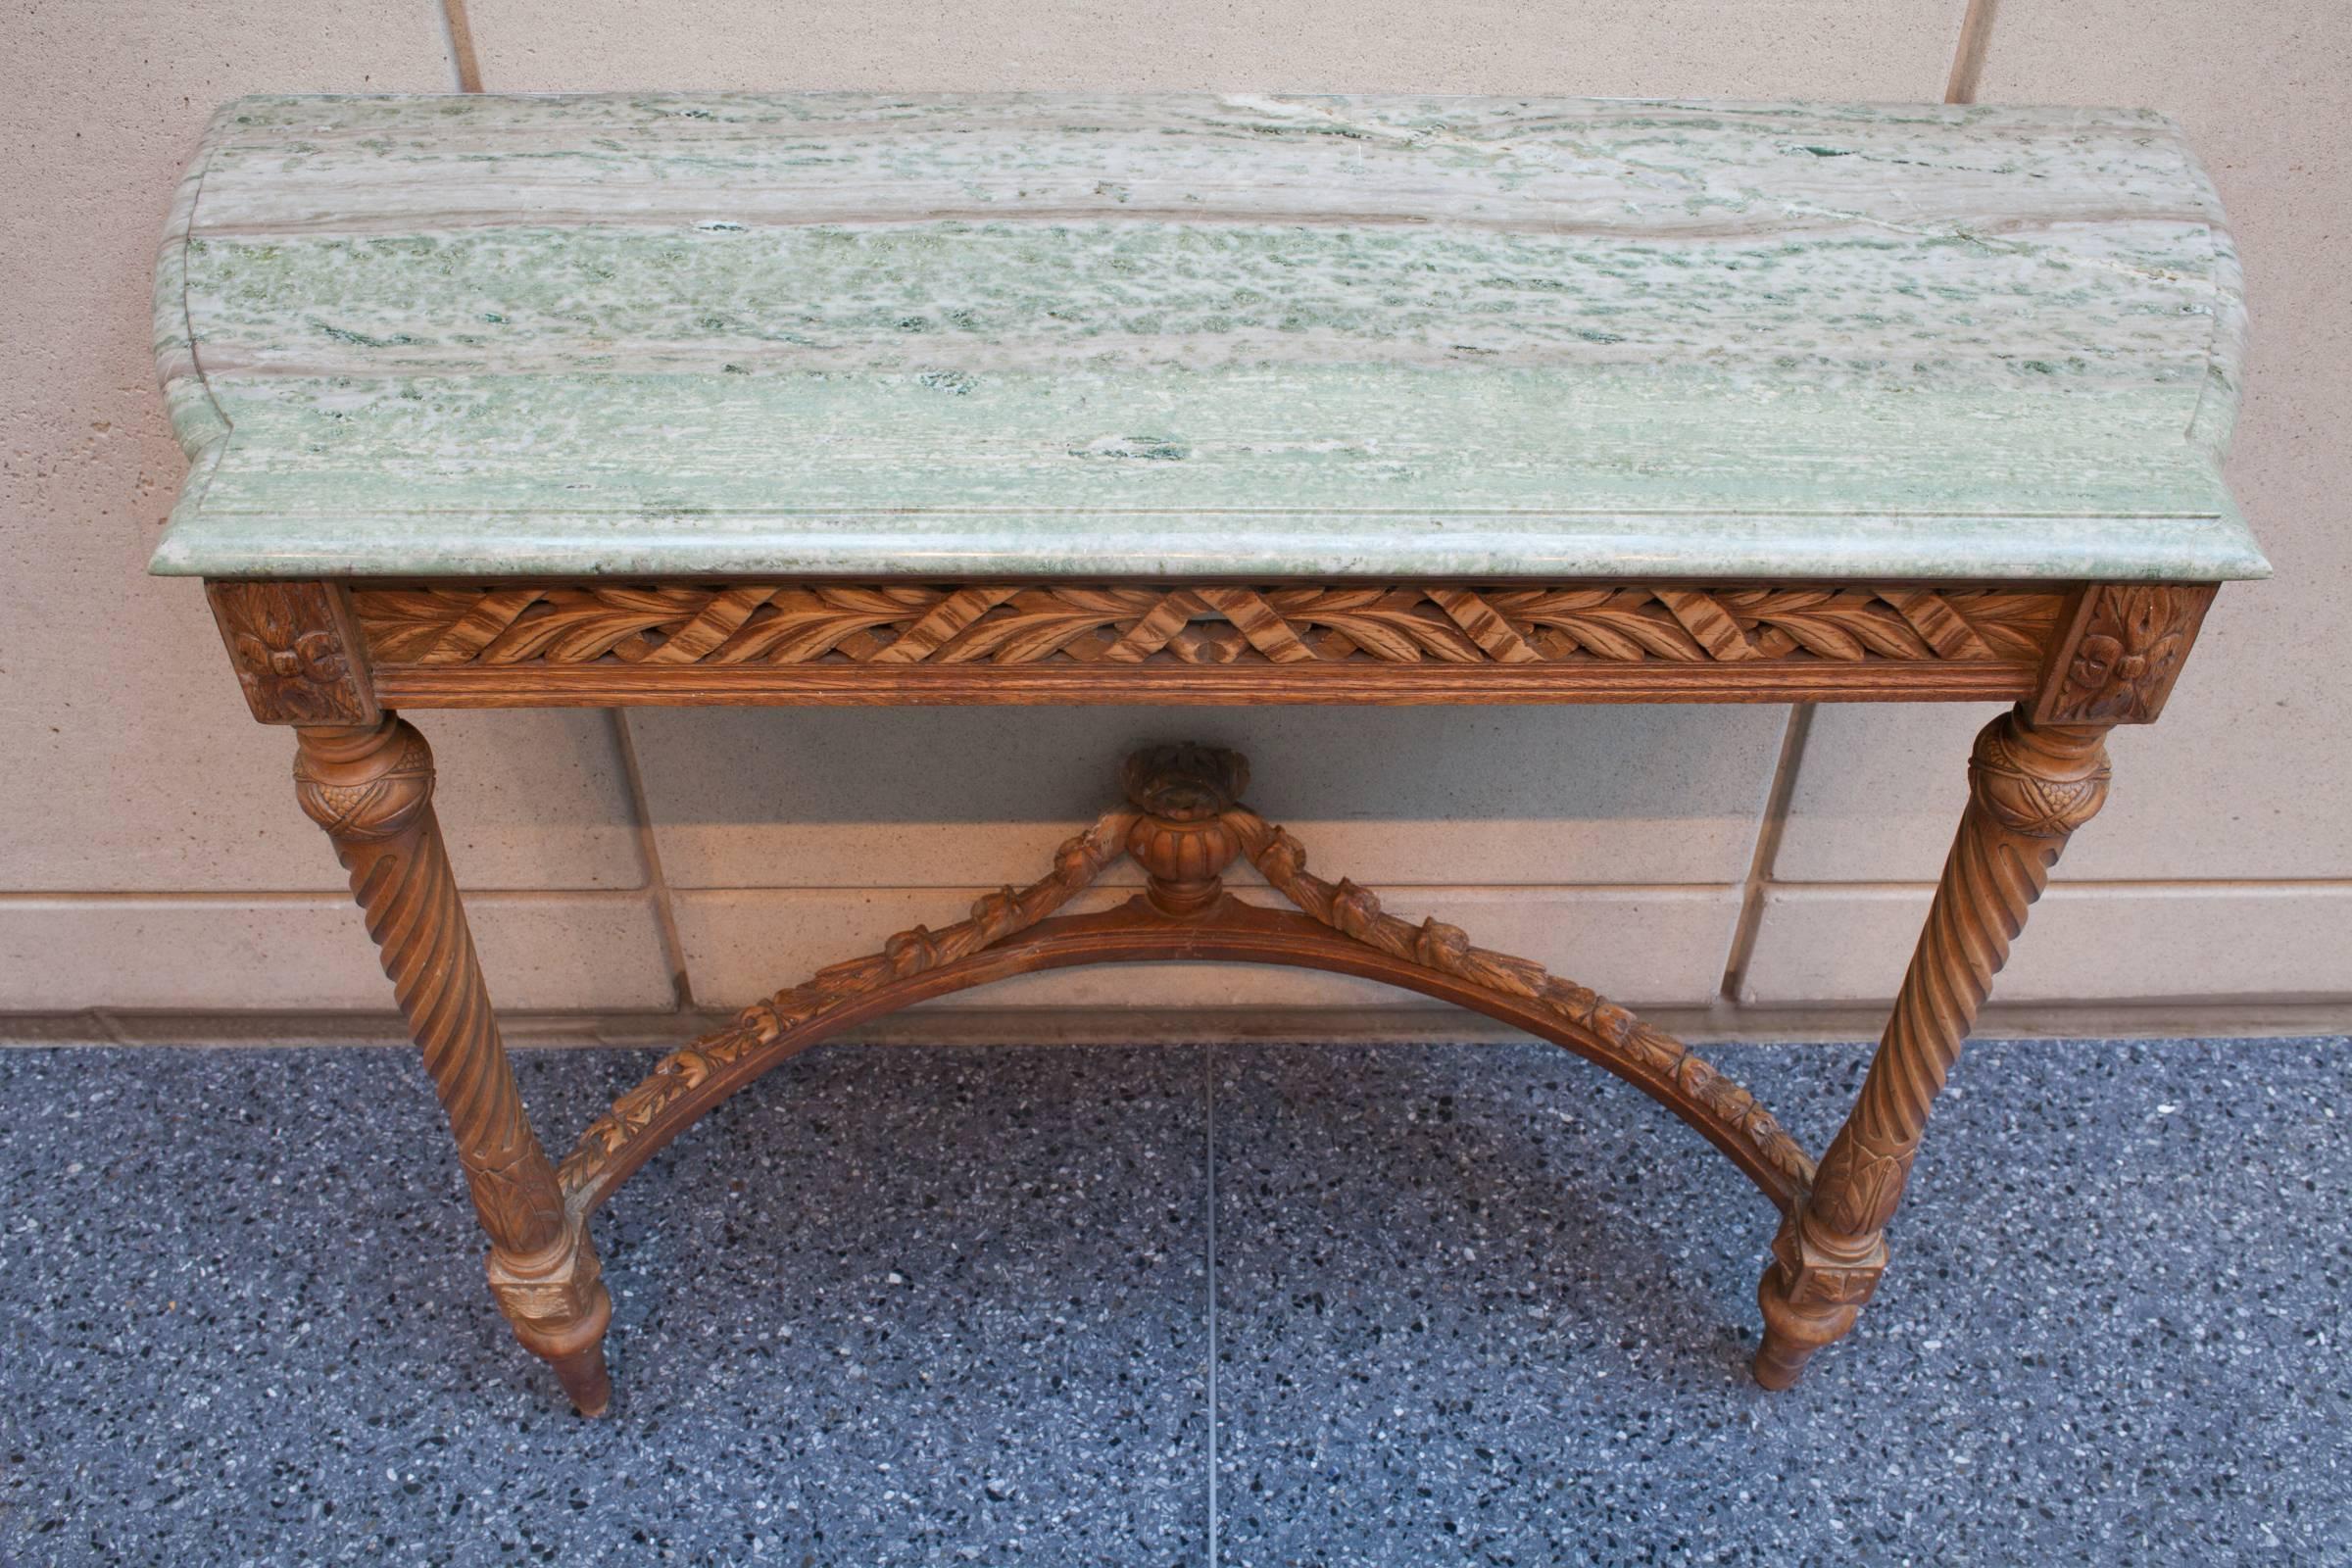 Carved wooden two-legged Louis XVI style console. The apron is carved to resemble ribbon wrapped leaves, while the legs are fluted spirals. The table is secured to the wall by two screws through the back apron. The shaped marble-top has an ogee edge